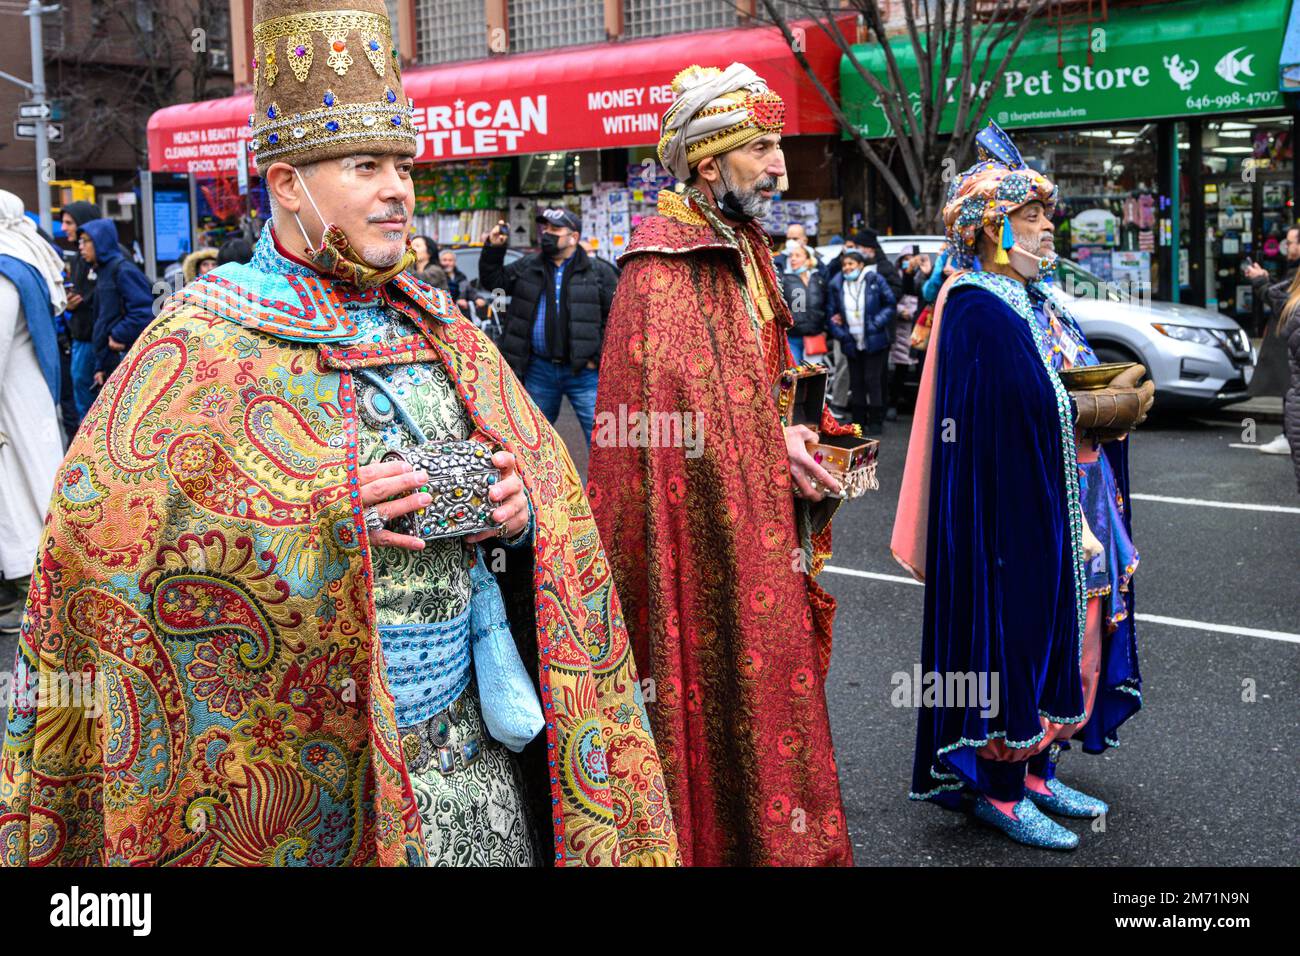 New York, USA. 6th Jan, 2023. Prticipants dressed up as Balthasar, Gaspar and Melchior the Wise Men march through the streets in East Harlem during the 46th annual Three Kings Day Parade organized by El Museo del Bario. The traditional Spanish celebration was held in person for the first time since the start of the coronavirus (COVID-19) pandemic. The theme for this year was: 'Entre Familia: Mental Health & Wellness of our Communities' focusing on the importance of mental health and wellness. Credit: Enrique Shore/Alamy Live News Stock Photo